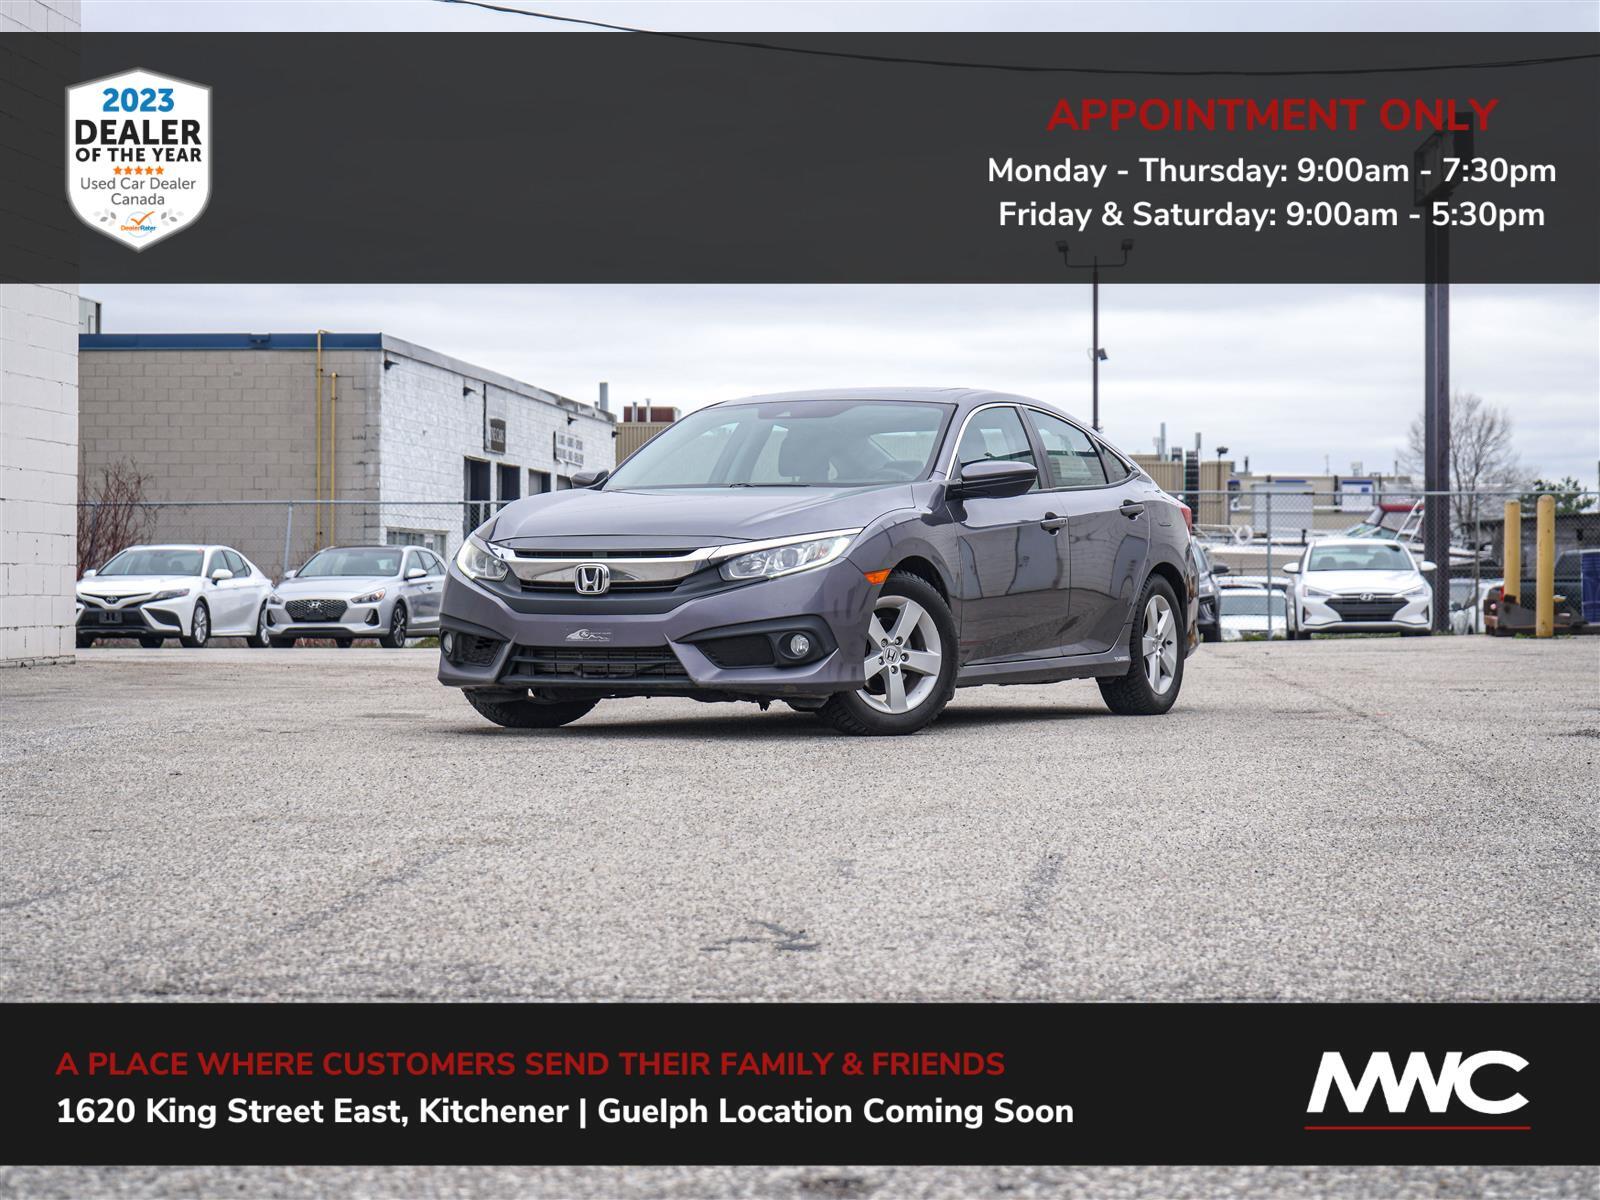 2016 Honda Civic EX-T | 1.5 | IN GUELPH, BY APPT ONLY